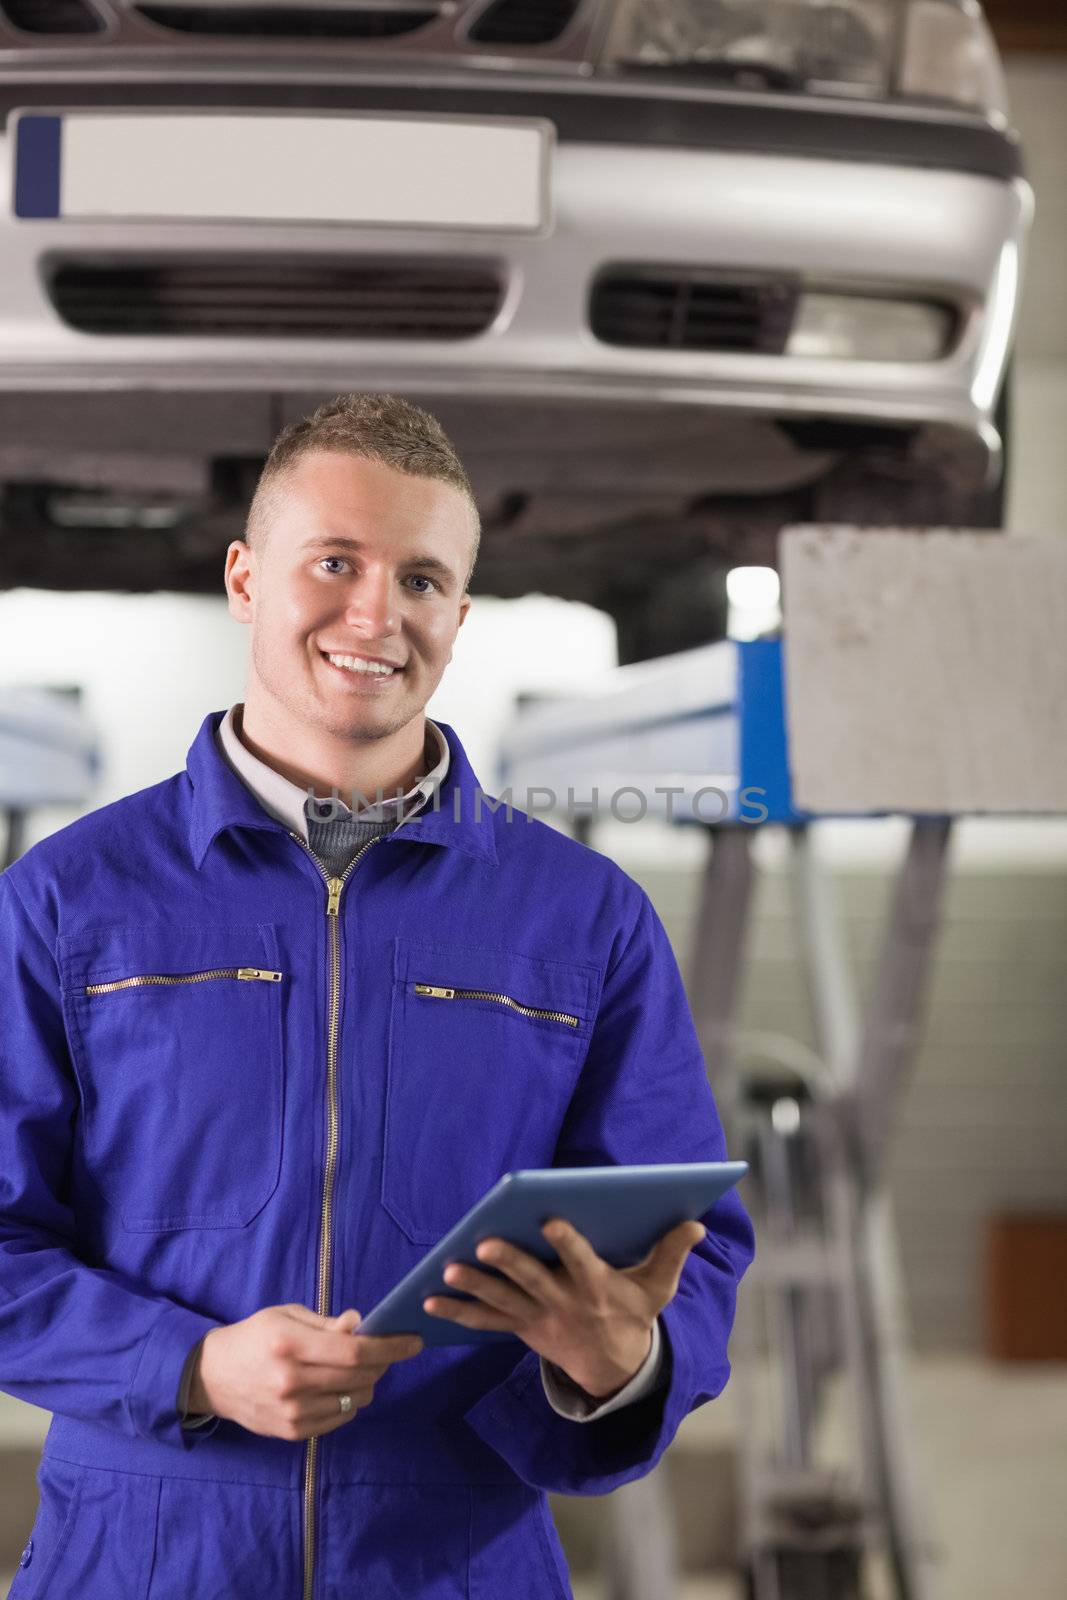 Smiling mechanic holding a tablet computer by Wavebreakmedia